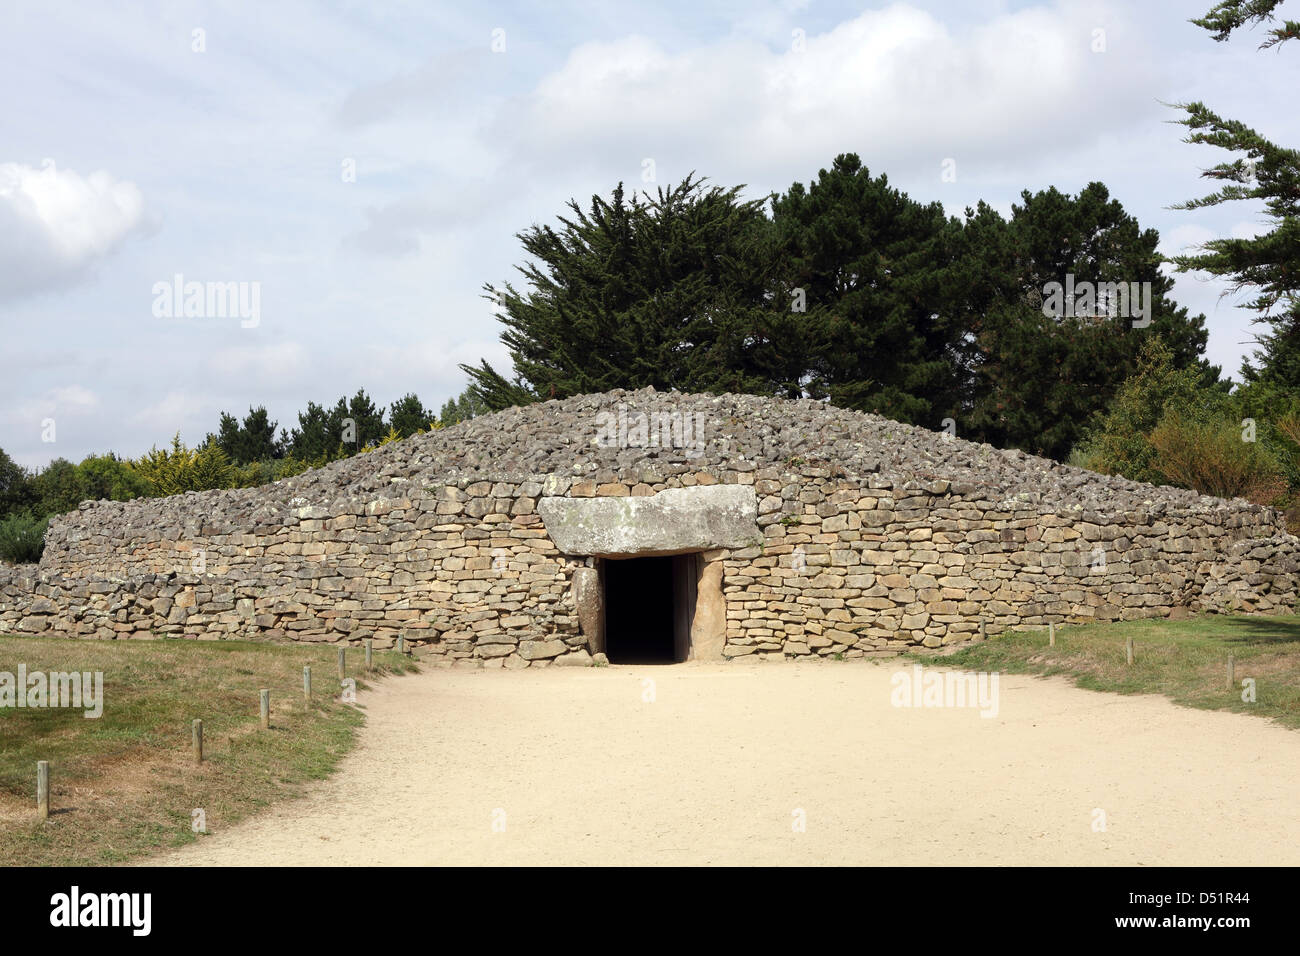 Table des Marchand, megalithic site near Locmariaquer, Brittany, France, September 2012 Stock Photo